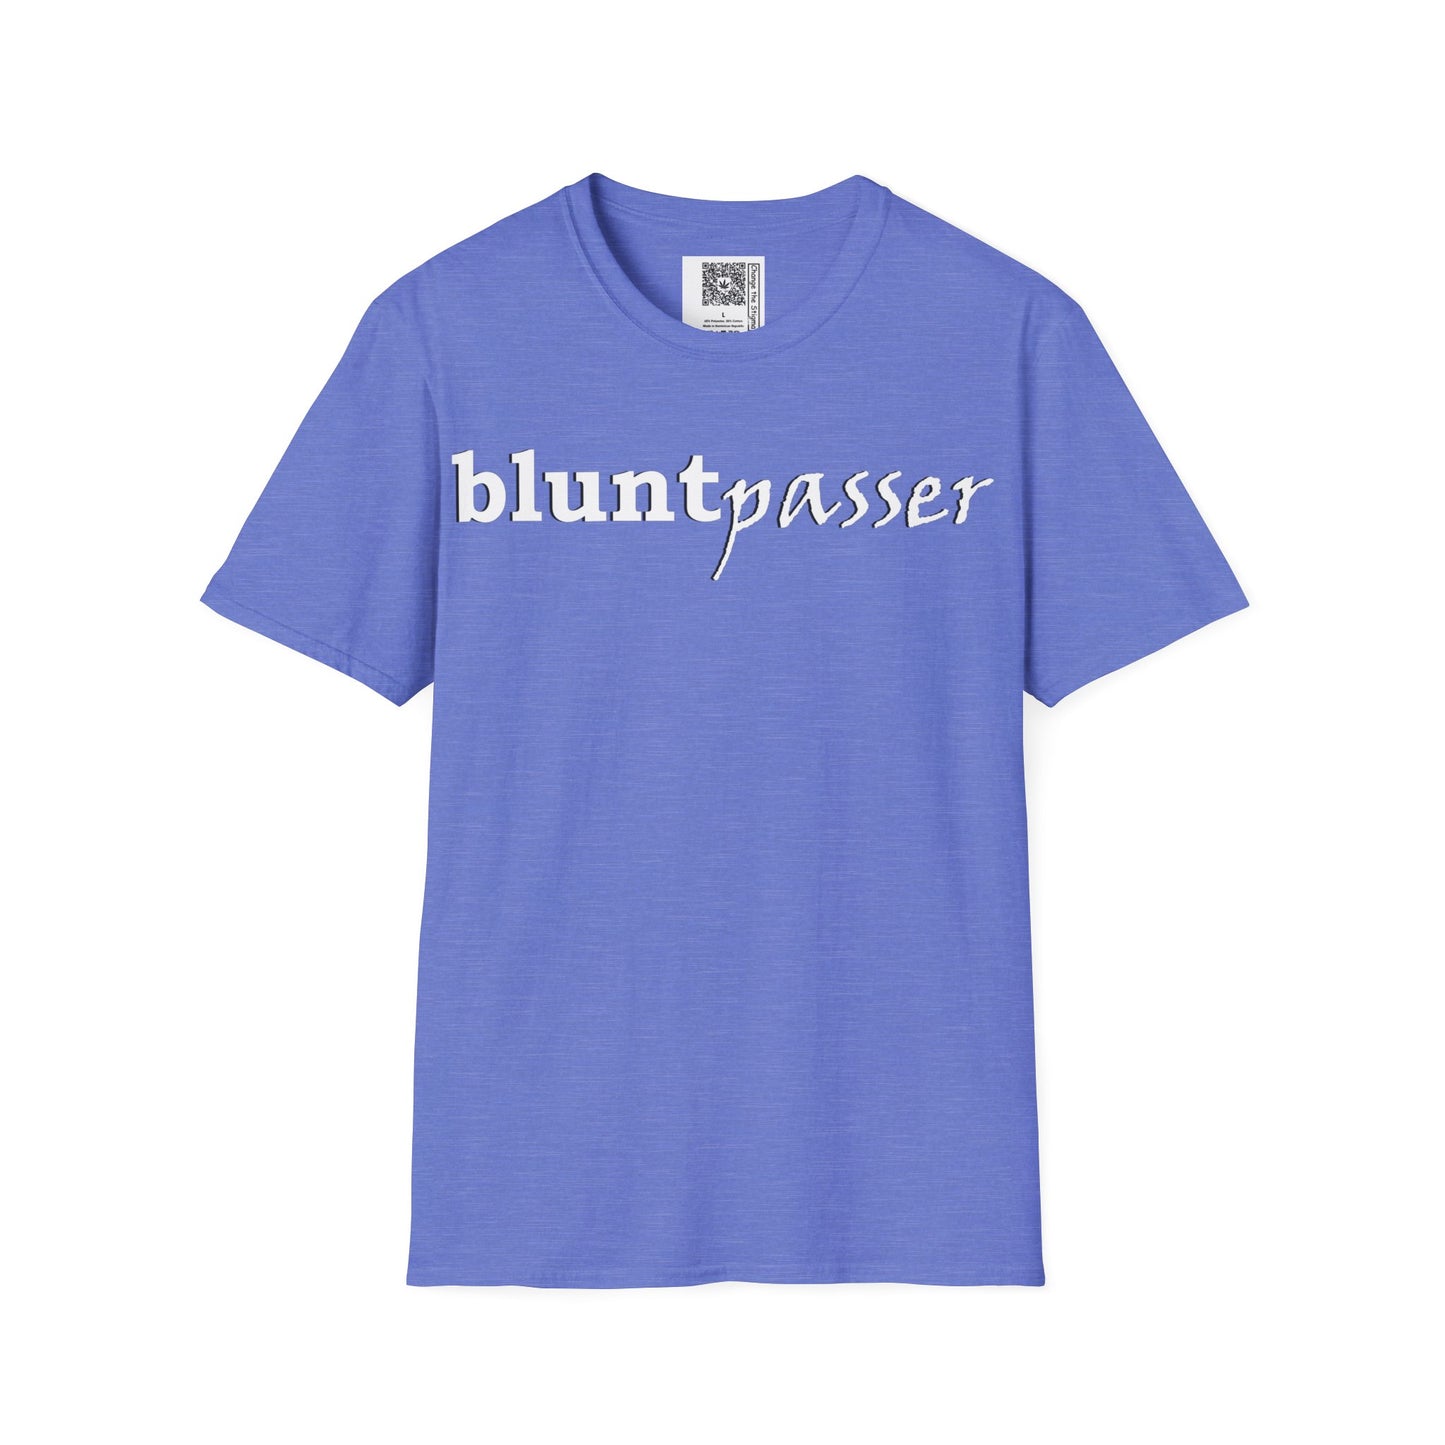 Change the Stigma, Heather Royal color, shirt saying "blunt passer", Shirt is open displayed, Qr code is shown neck tag